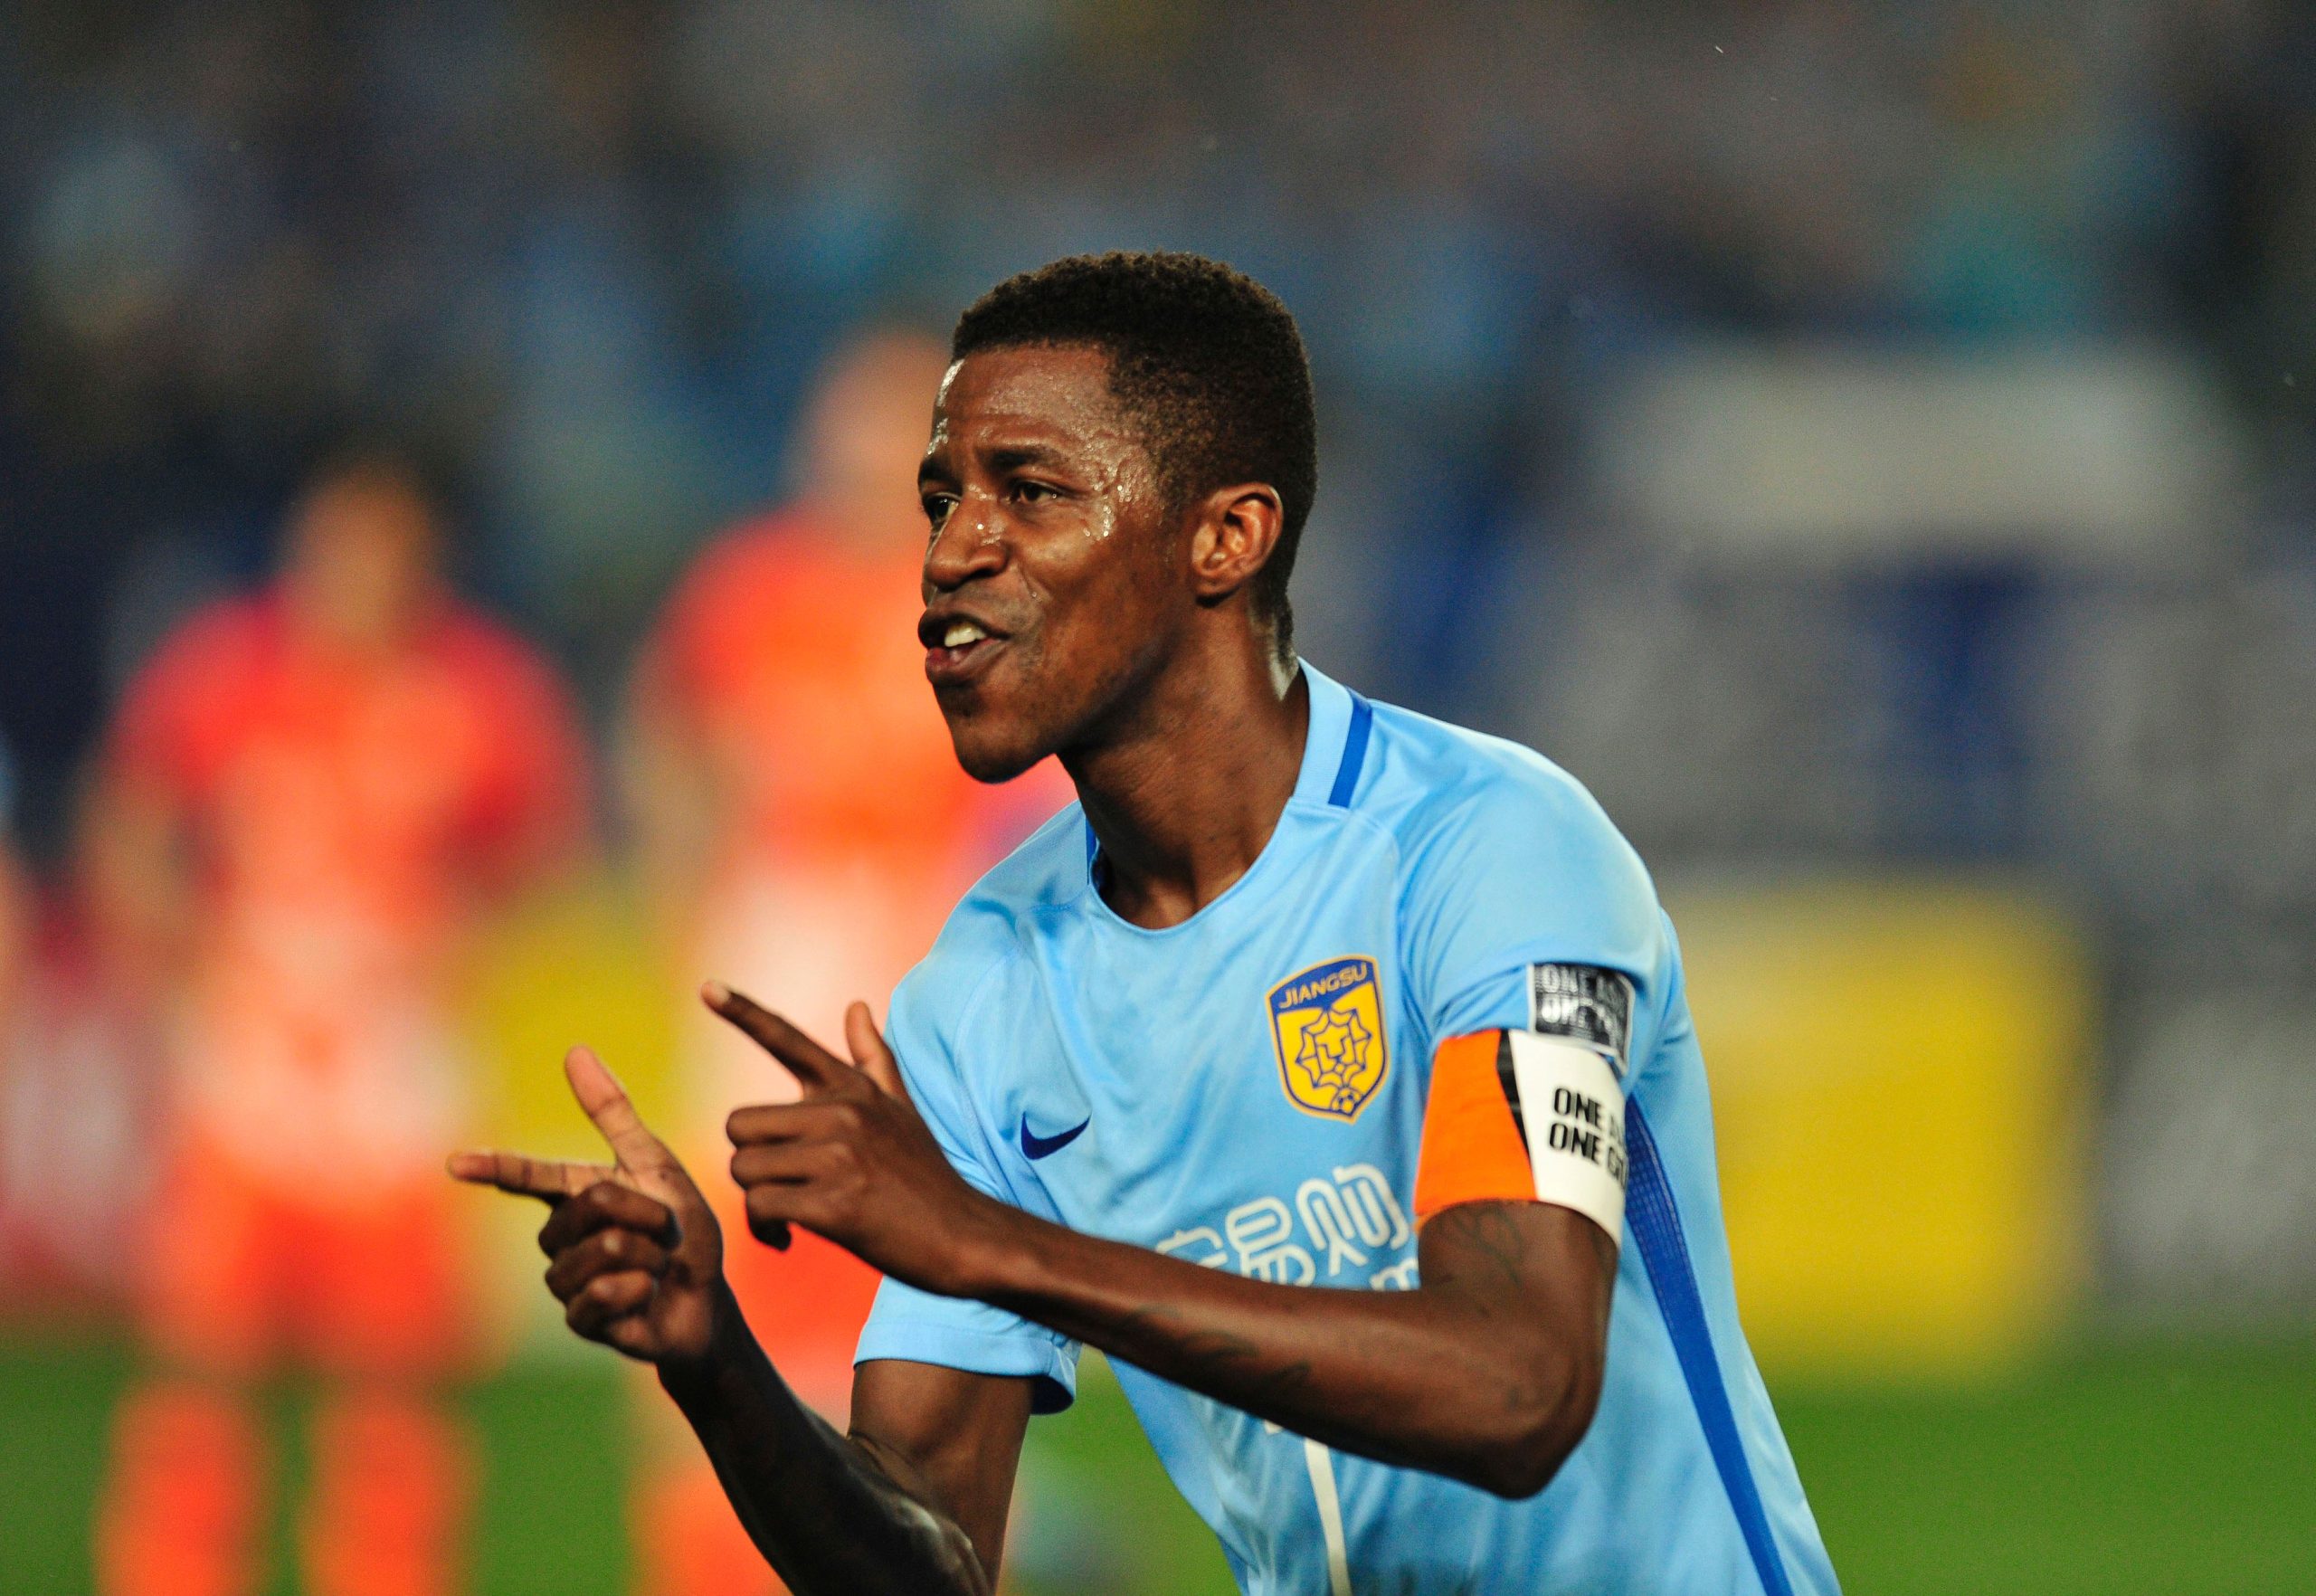 Ramires during his time at Jiangsu Suning after he left Chelsea in 2016.